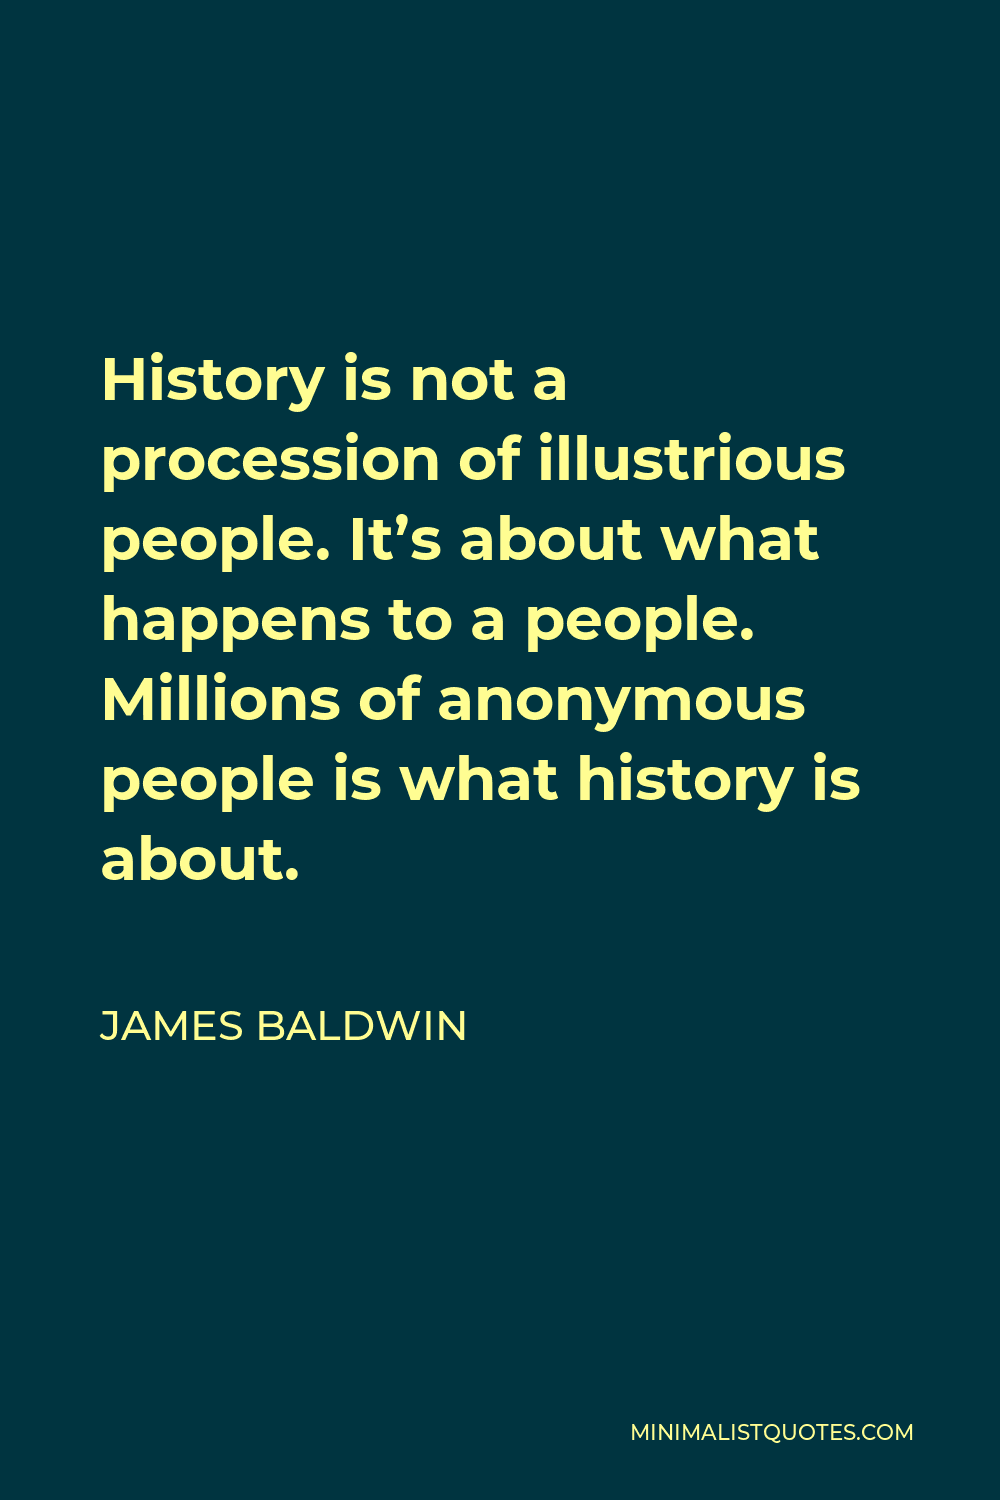 James Baldwin Quote - History is not a procession of illustrious people. It’s about what happens to a people. Millions of anonymous people is what history is about.